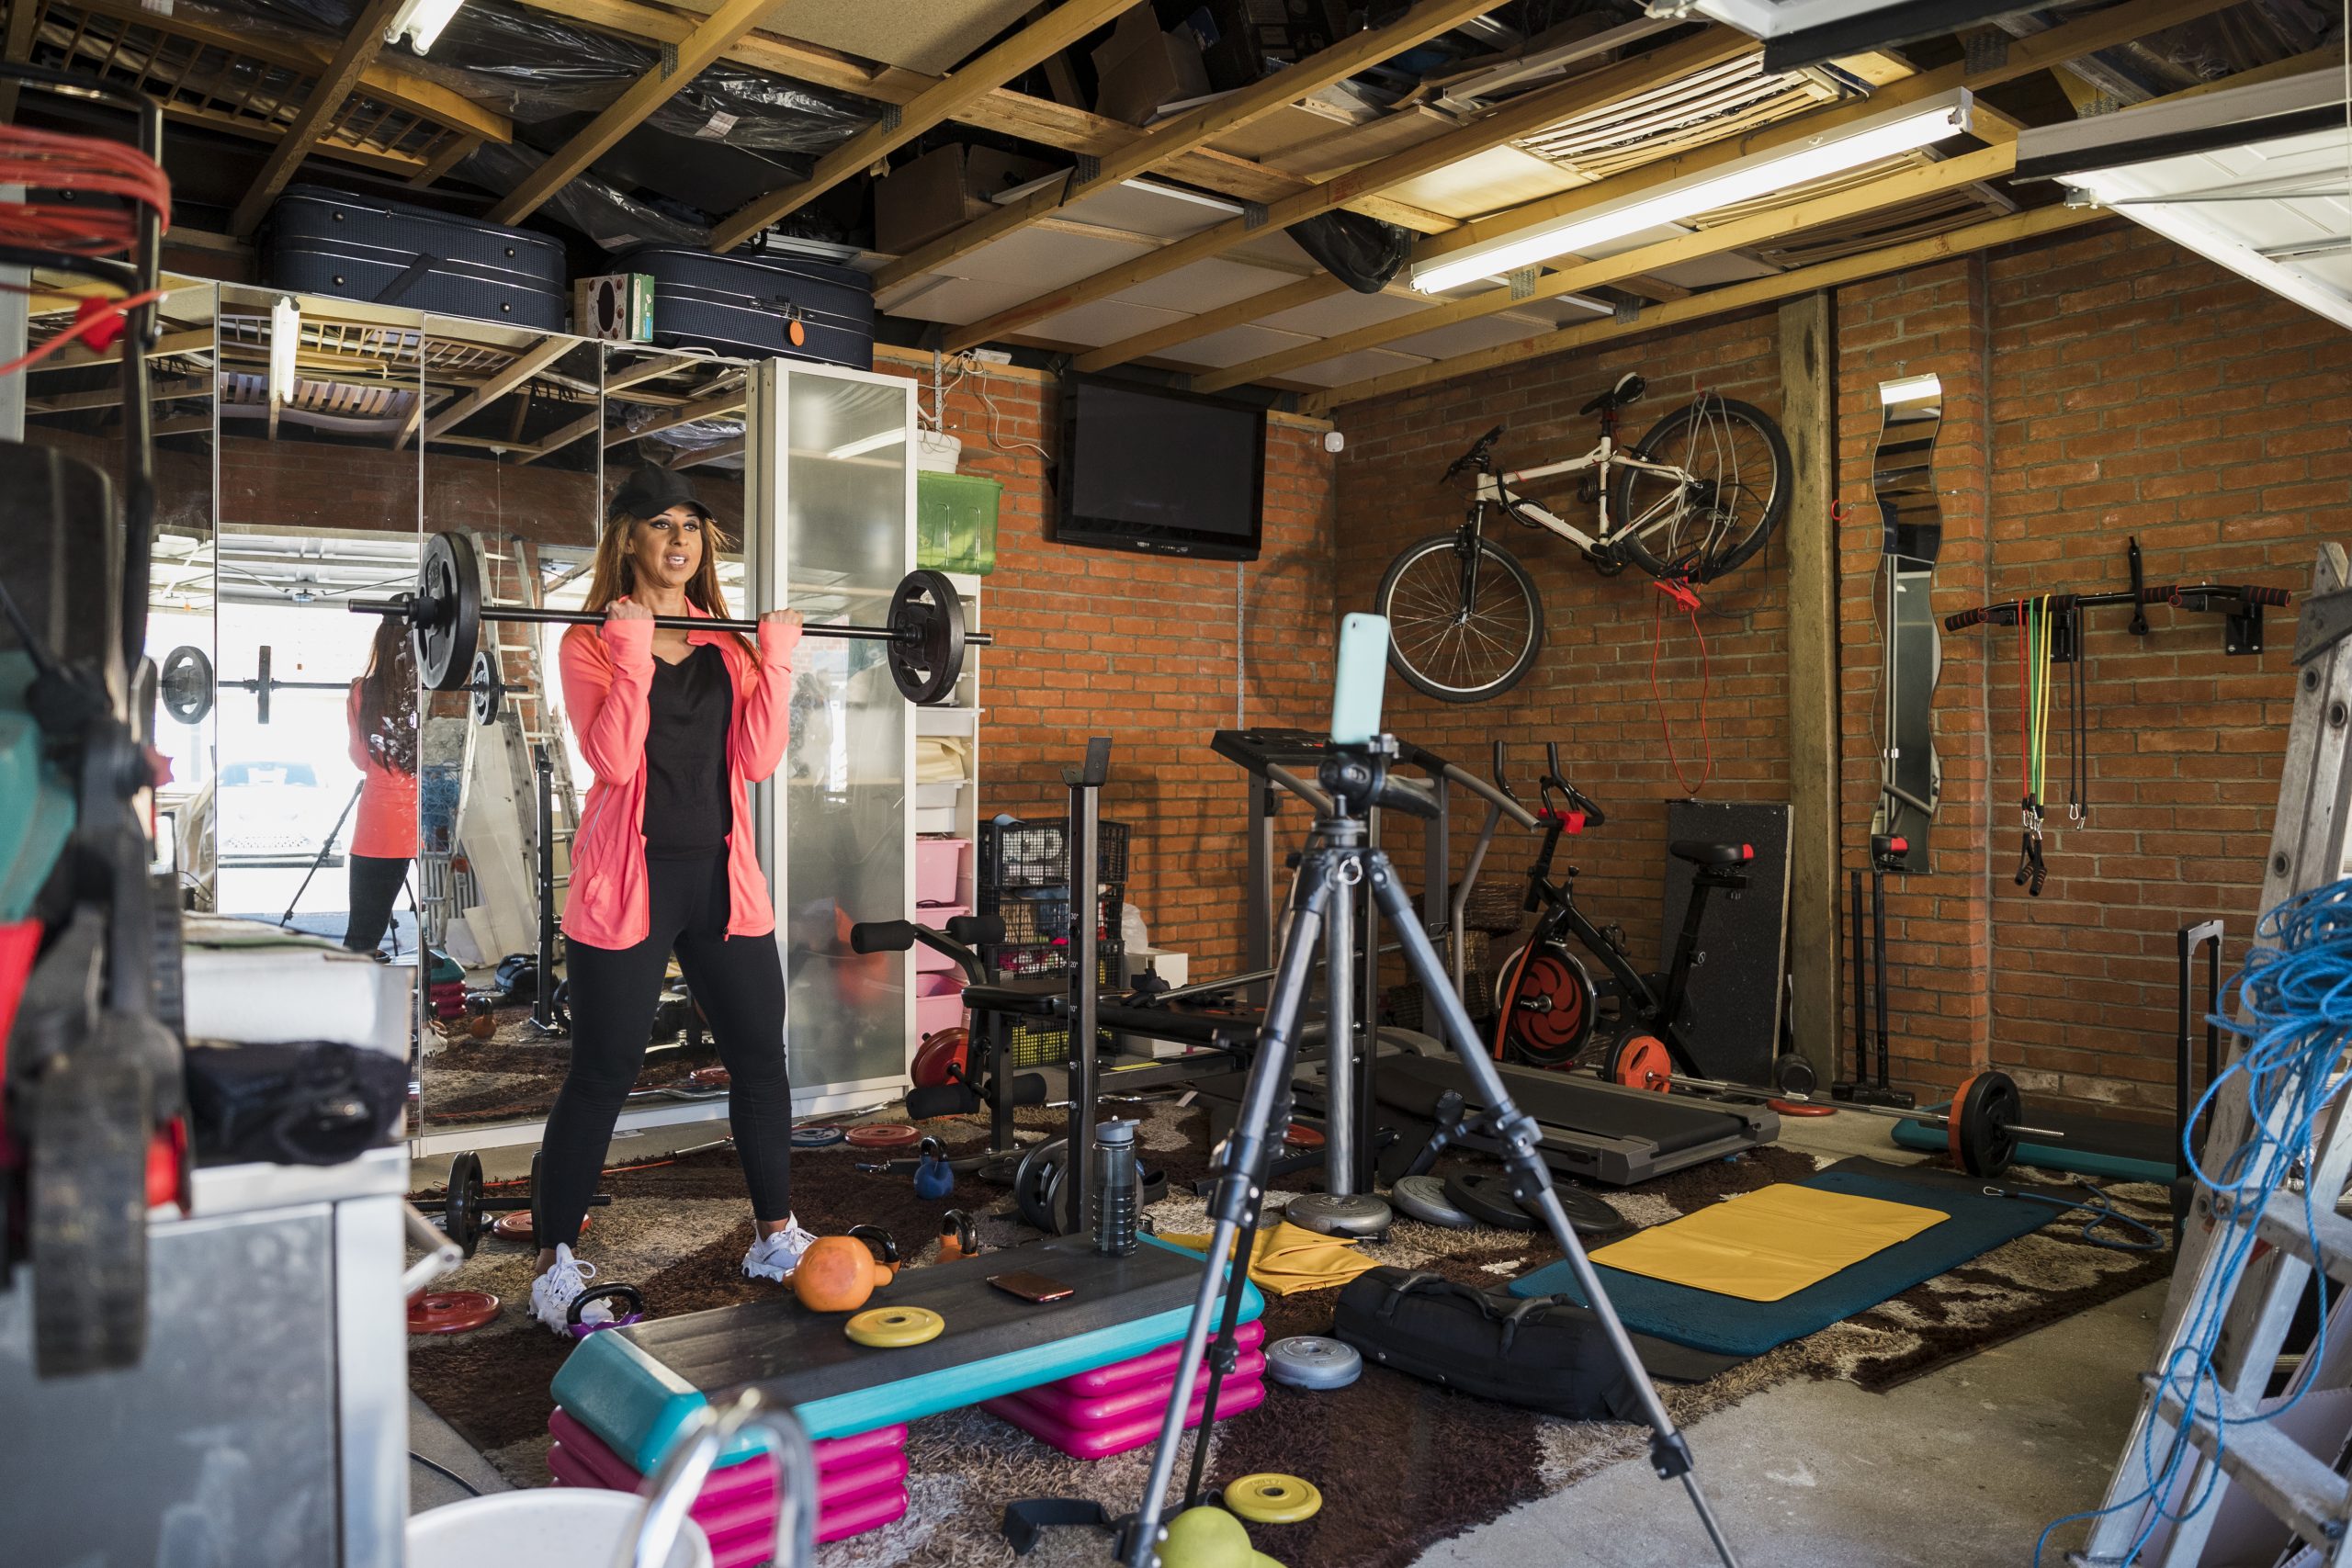 South Asian woman aged 45-55 weightlifting in her garage